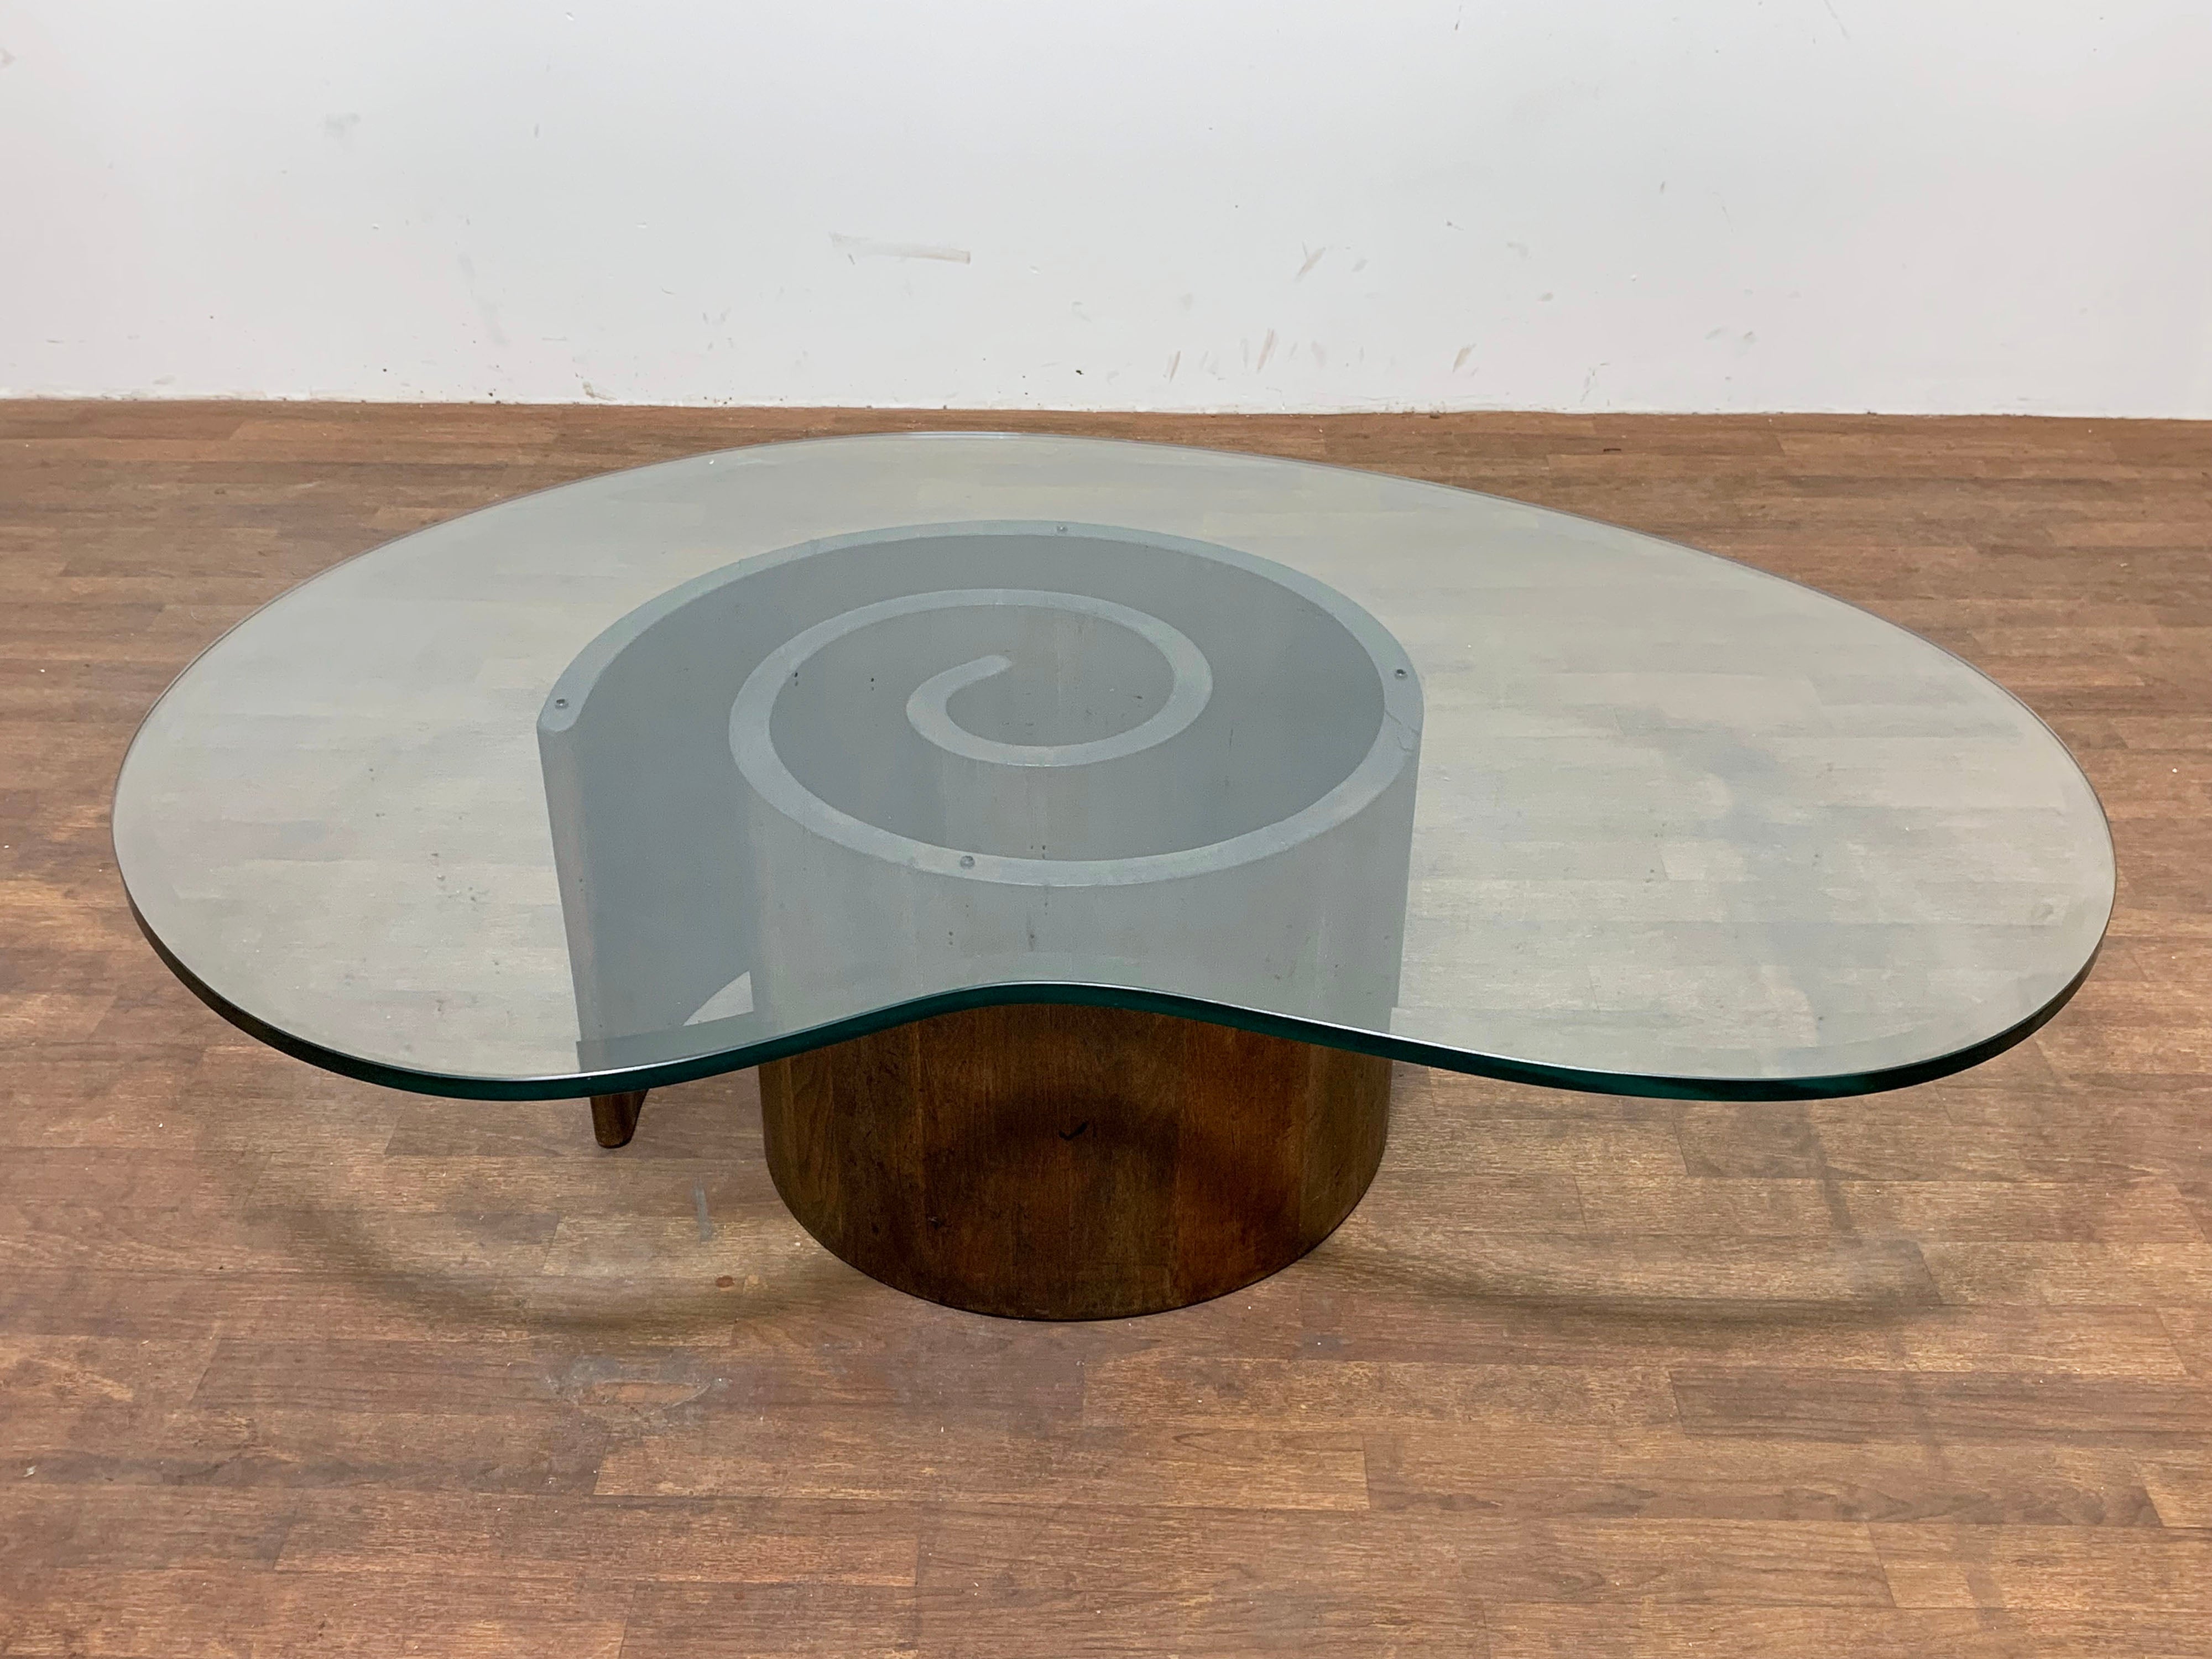 Original Vladimir Kagan “snail” coffee table in spiral formed walnut paired with a boomerang shaped glass top, circa 1960s. Please note the glass top is not original to the table.